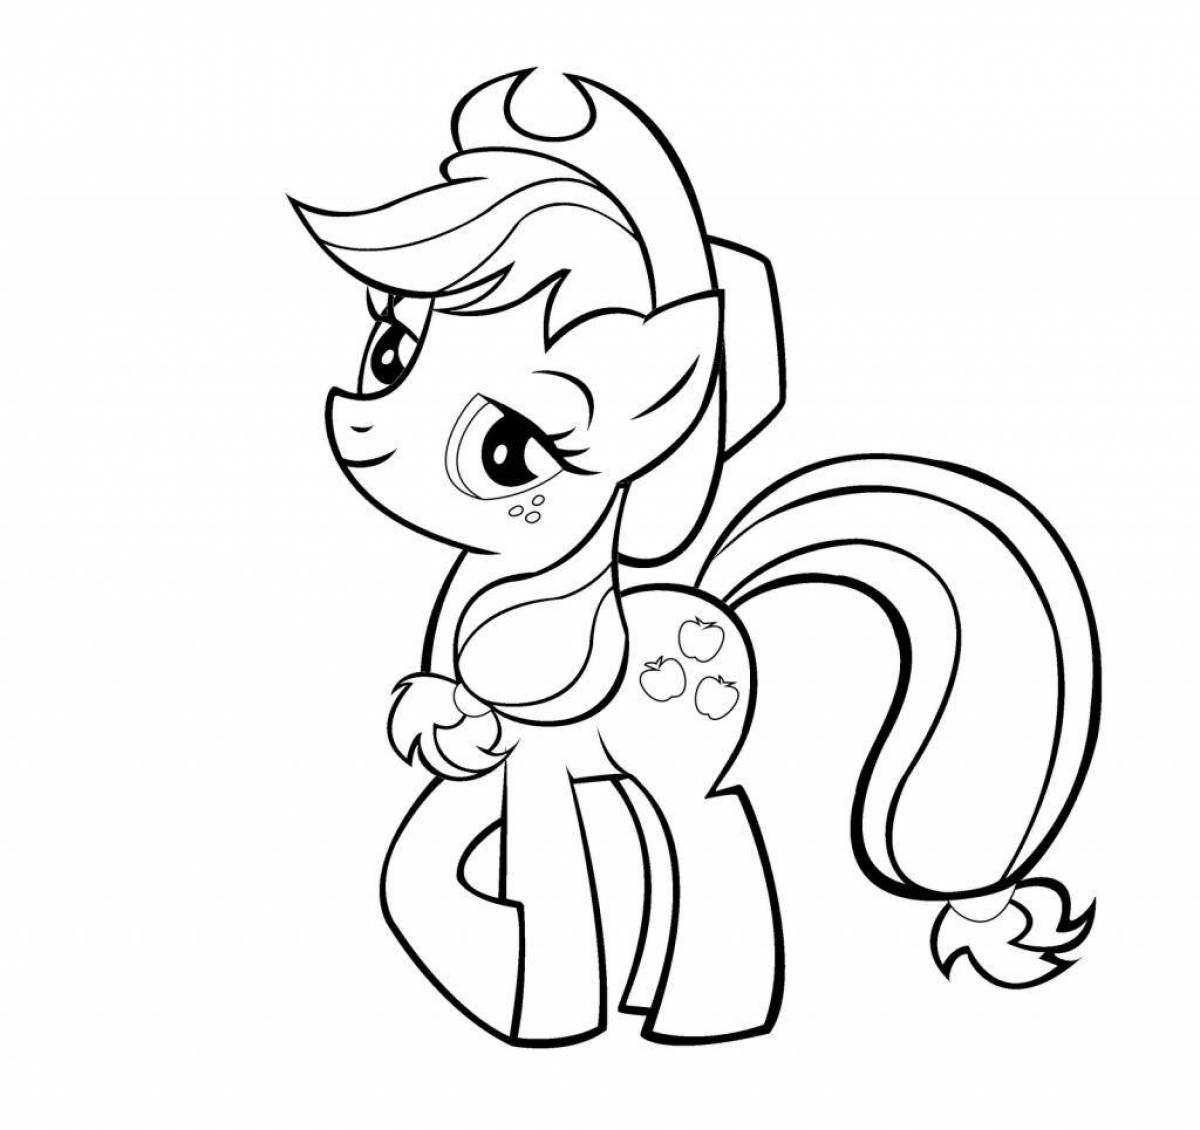 Apple jack adorable coloring book